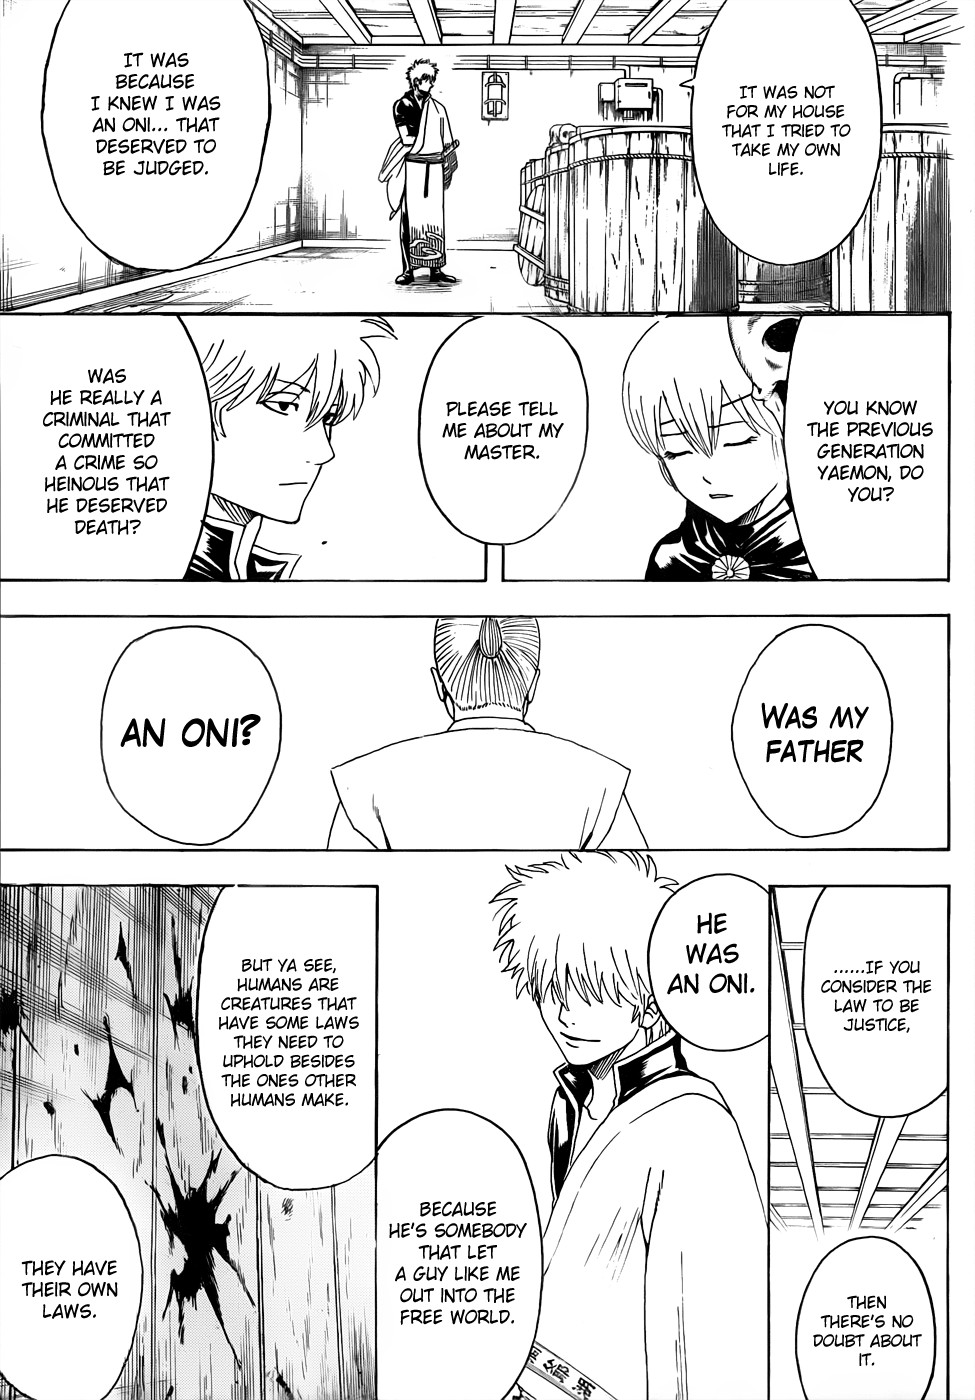 Gintama chapter 465 page 10